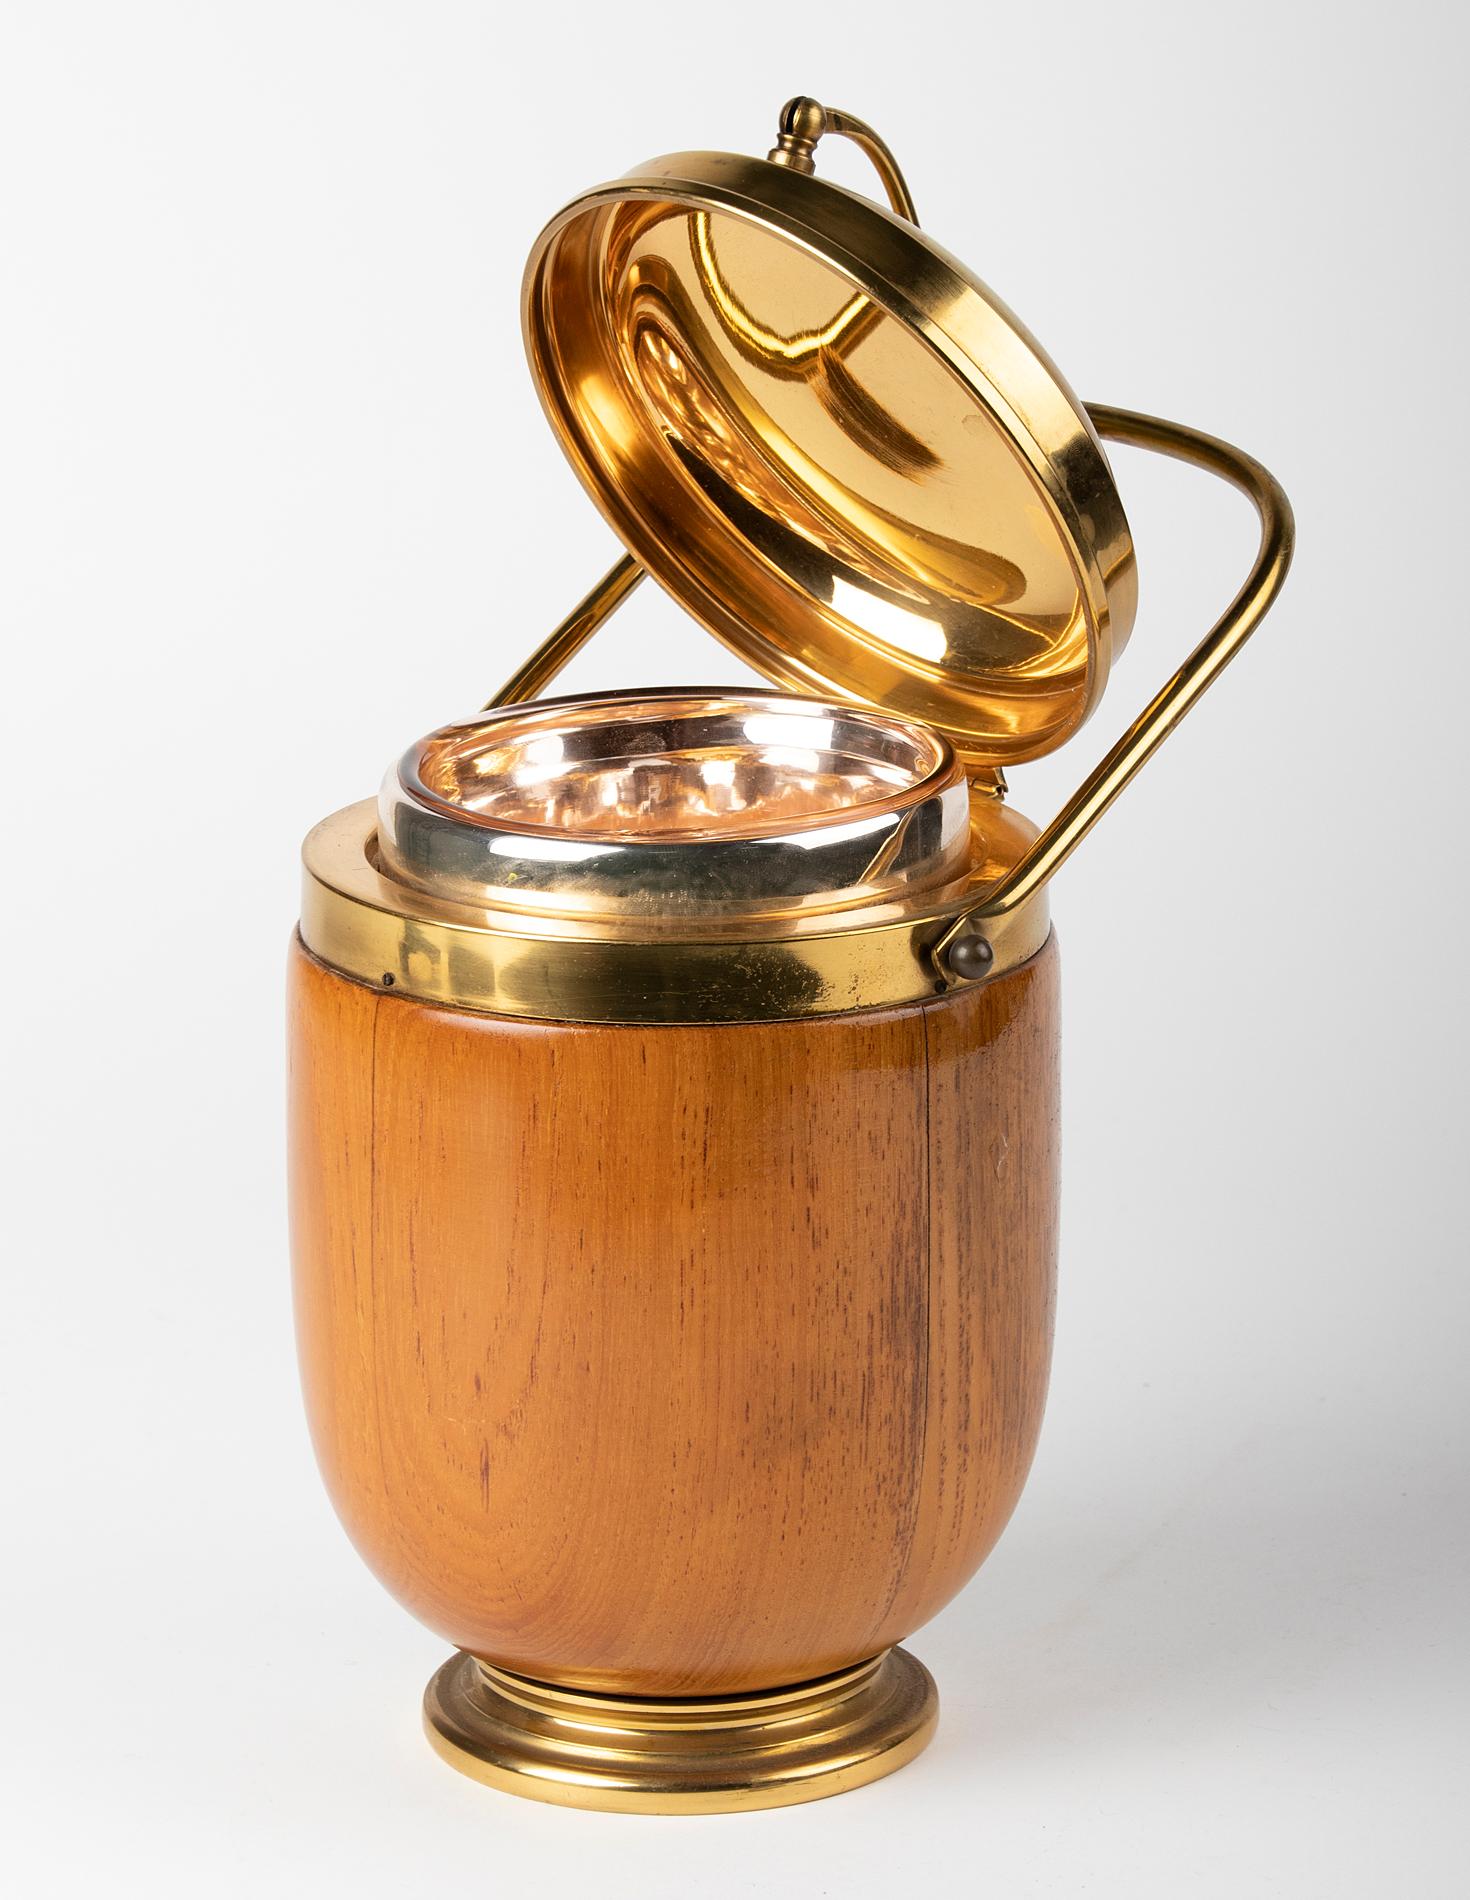 A chic mid 20th century Italian teak wooden thermal ice bucket by Aldo Tura for Macabo, Circa 1950/60s. This large ice bucket has the original pink mercury glass liner and a hinged lid to ensure the ice remains cold for longer. A particularly smart